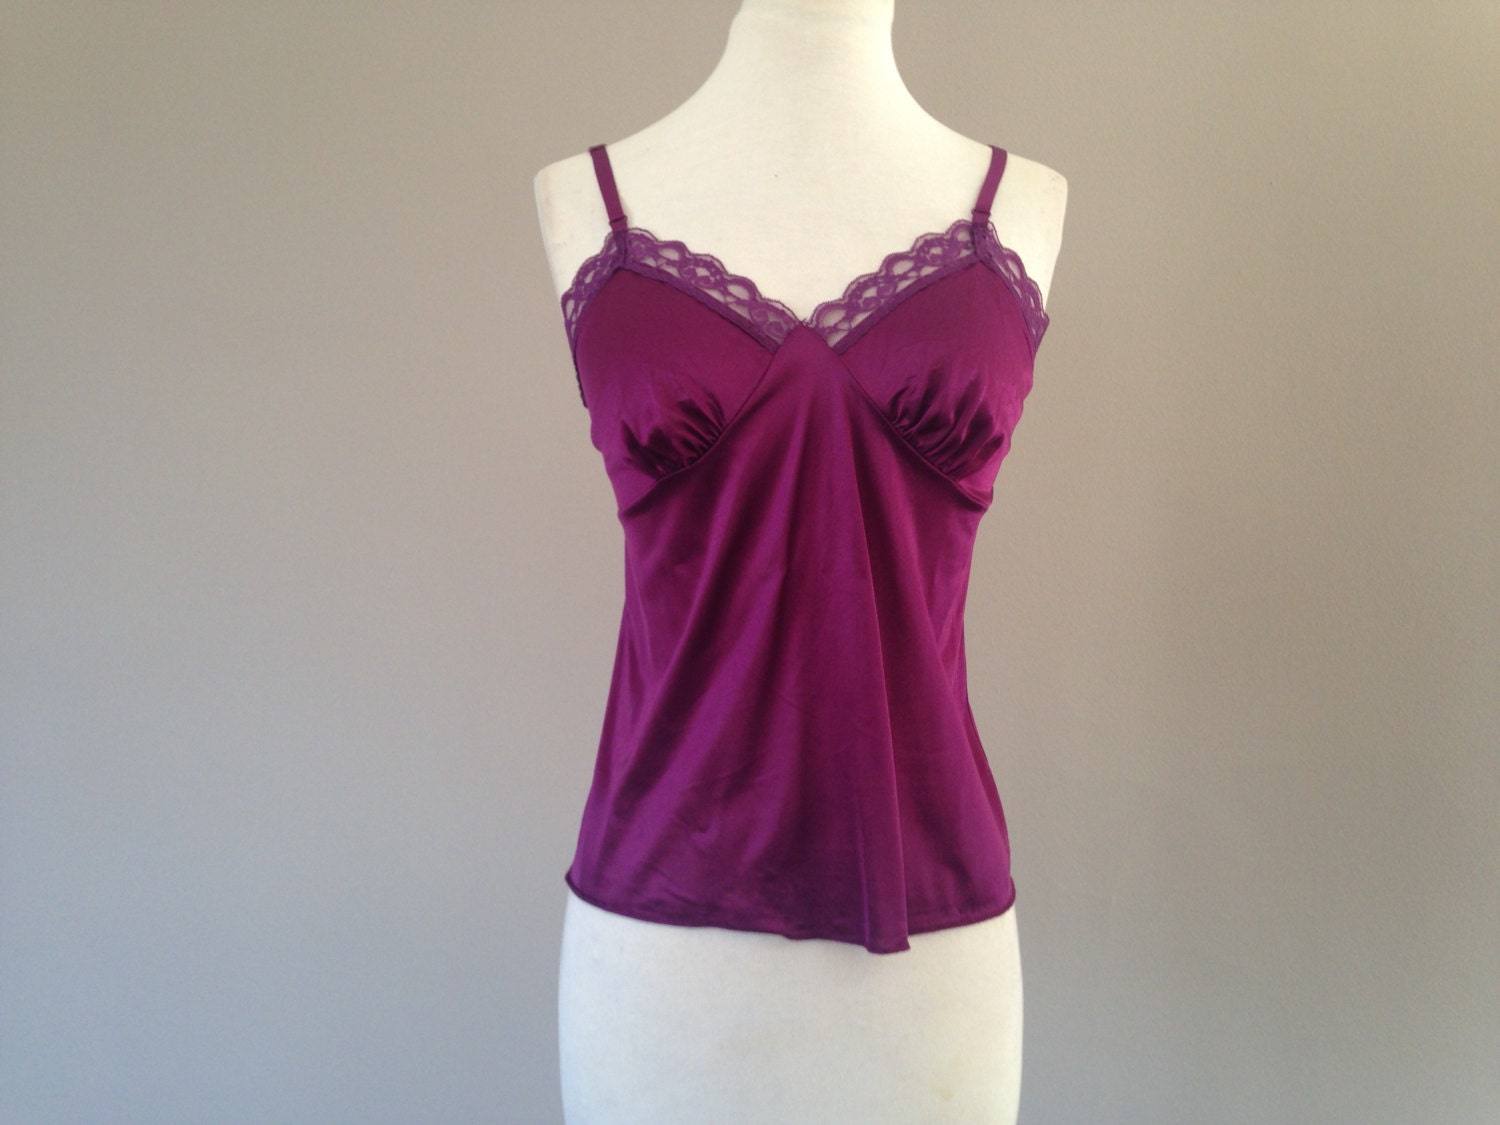 36 / Camisole Top / Nylon & Lace Cami / Vintage Lingerie by